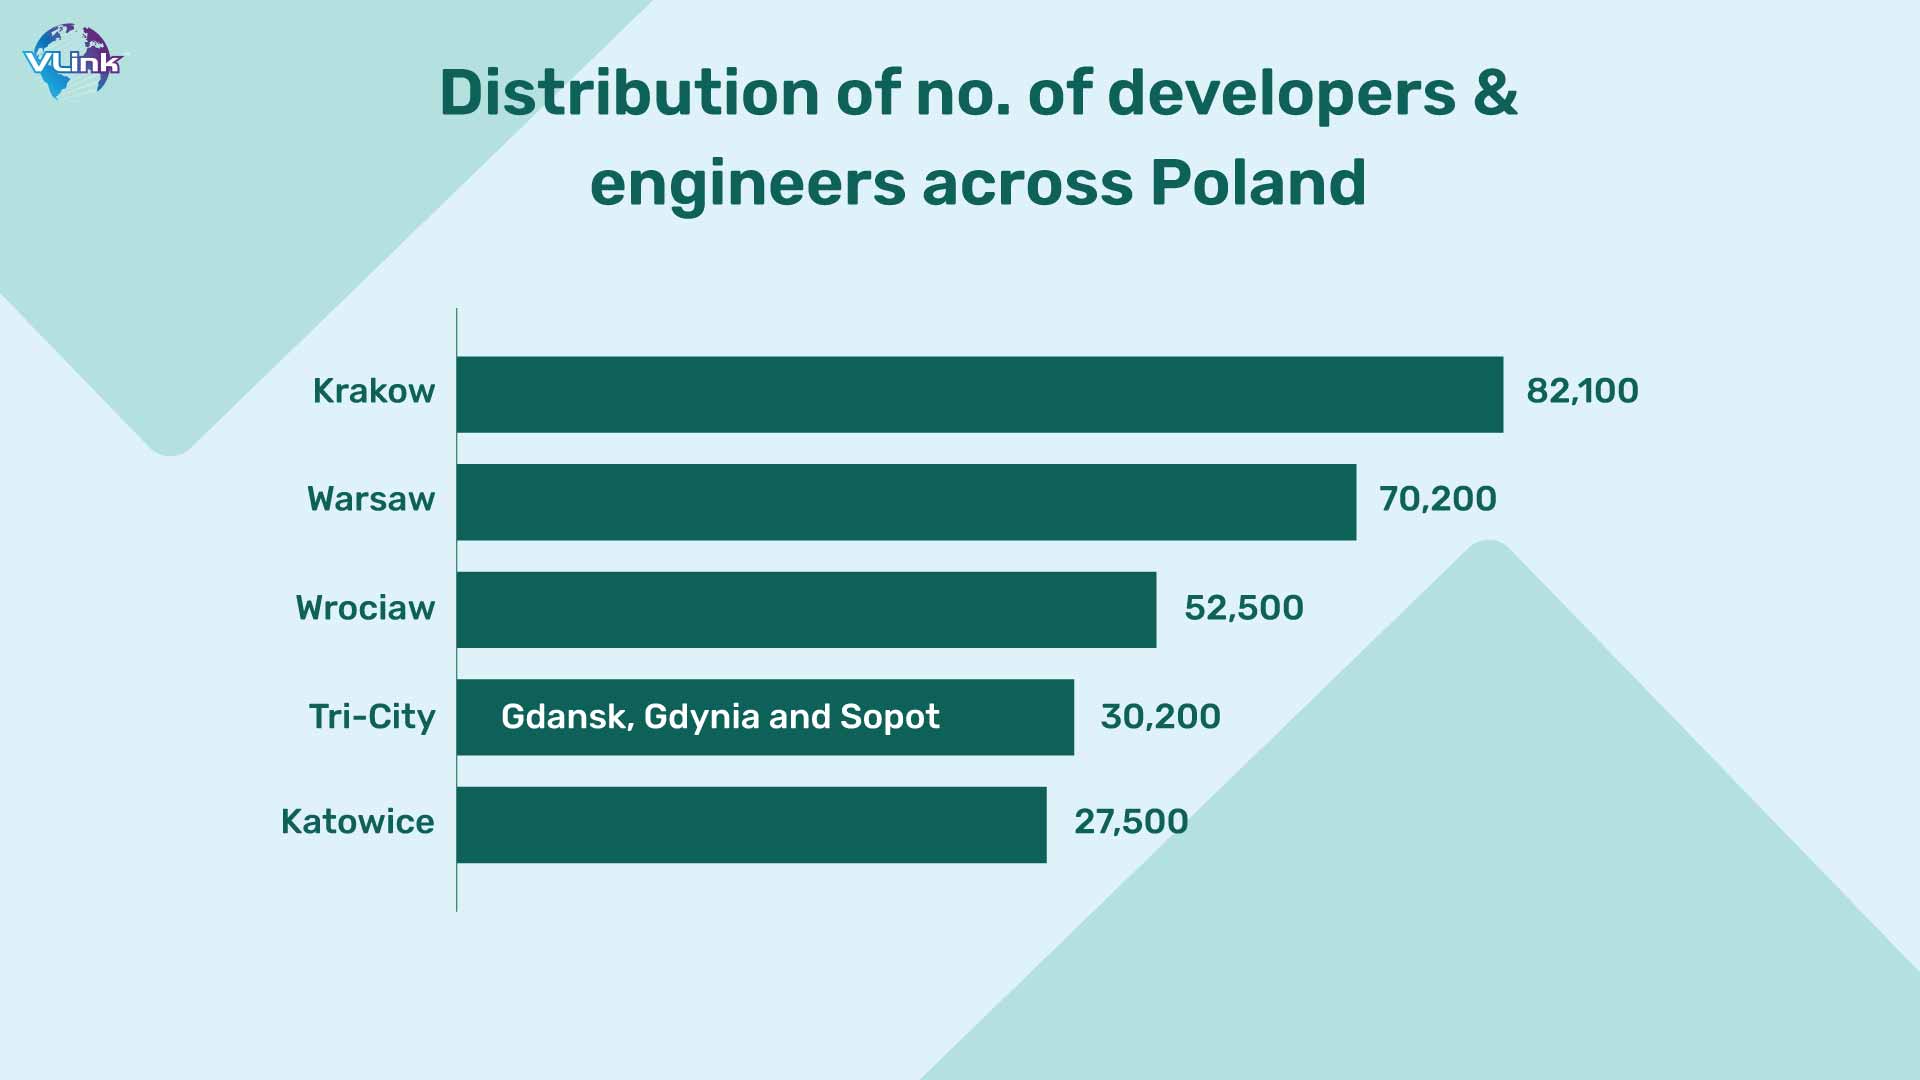 Distribution of No of Developers & engineers across poland